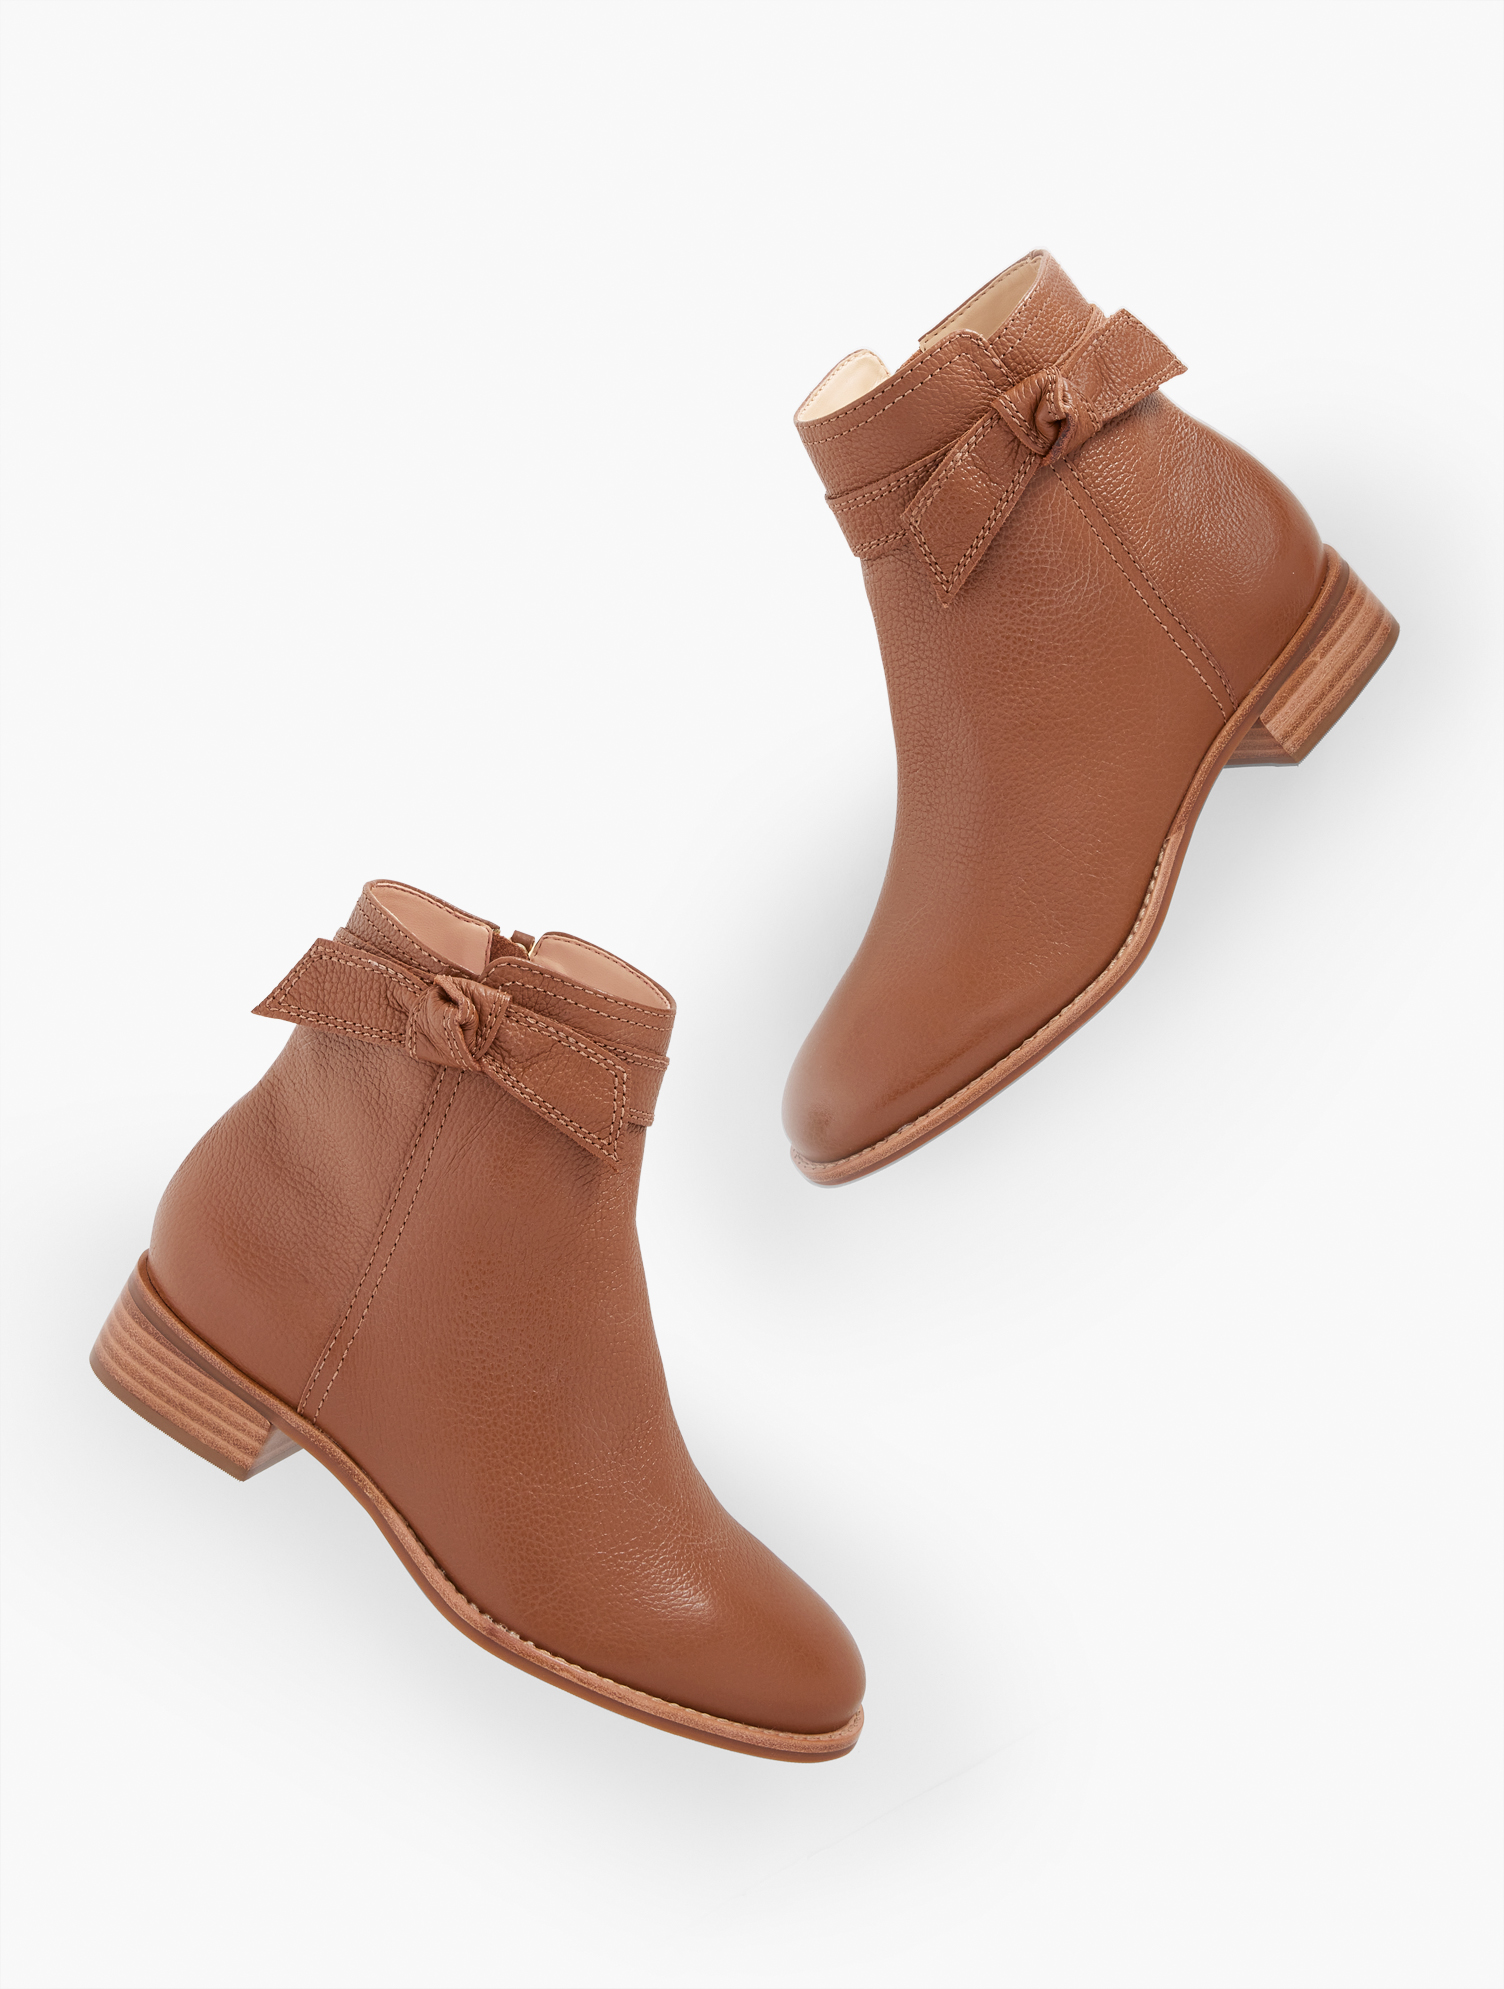 Talbots Tish Bow Ankle Boots - Pebble Leather - Cognac - 6m